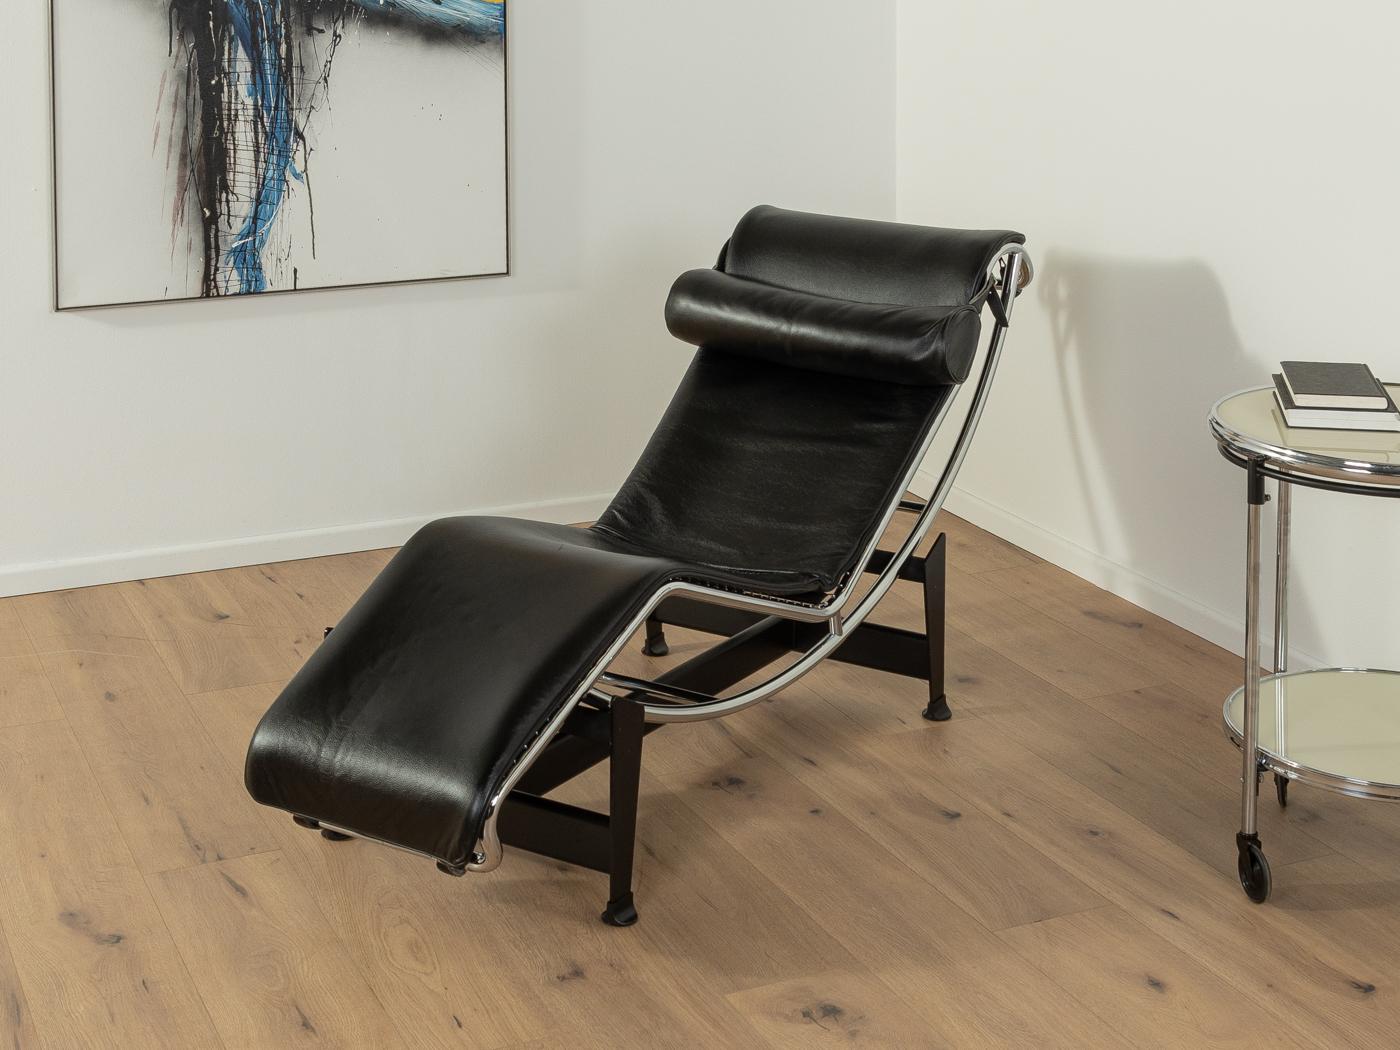 Legendary chaise longue LC 4 designed by LE CORBUSIER for Cassina in 1928. High-quality chrome frame on a black steel construction with a reclining surface with original leather cover in black. Mint condition with original label.
Height: 77 - 85